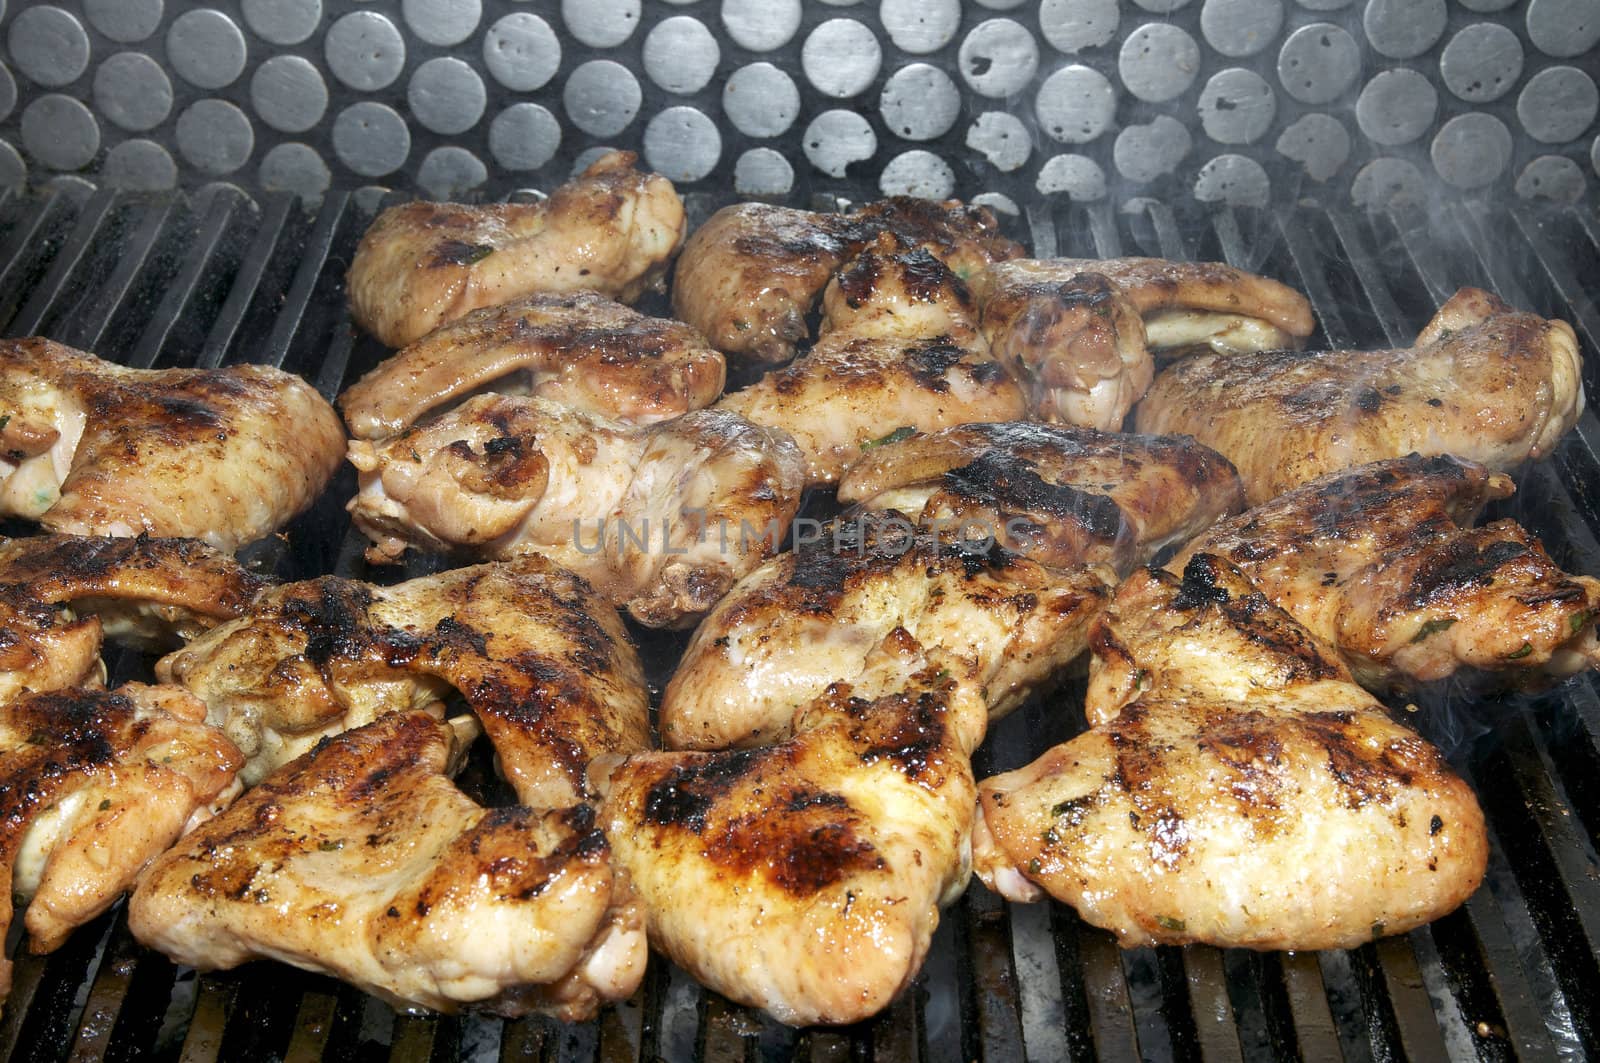 cooking chicken wings in a restaurant on the grill